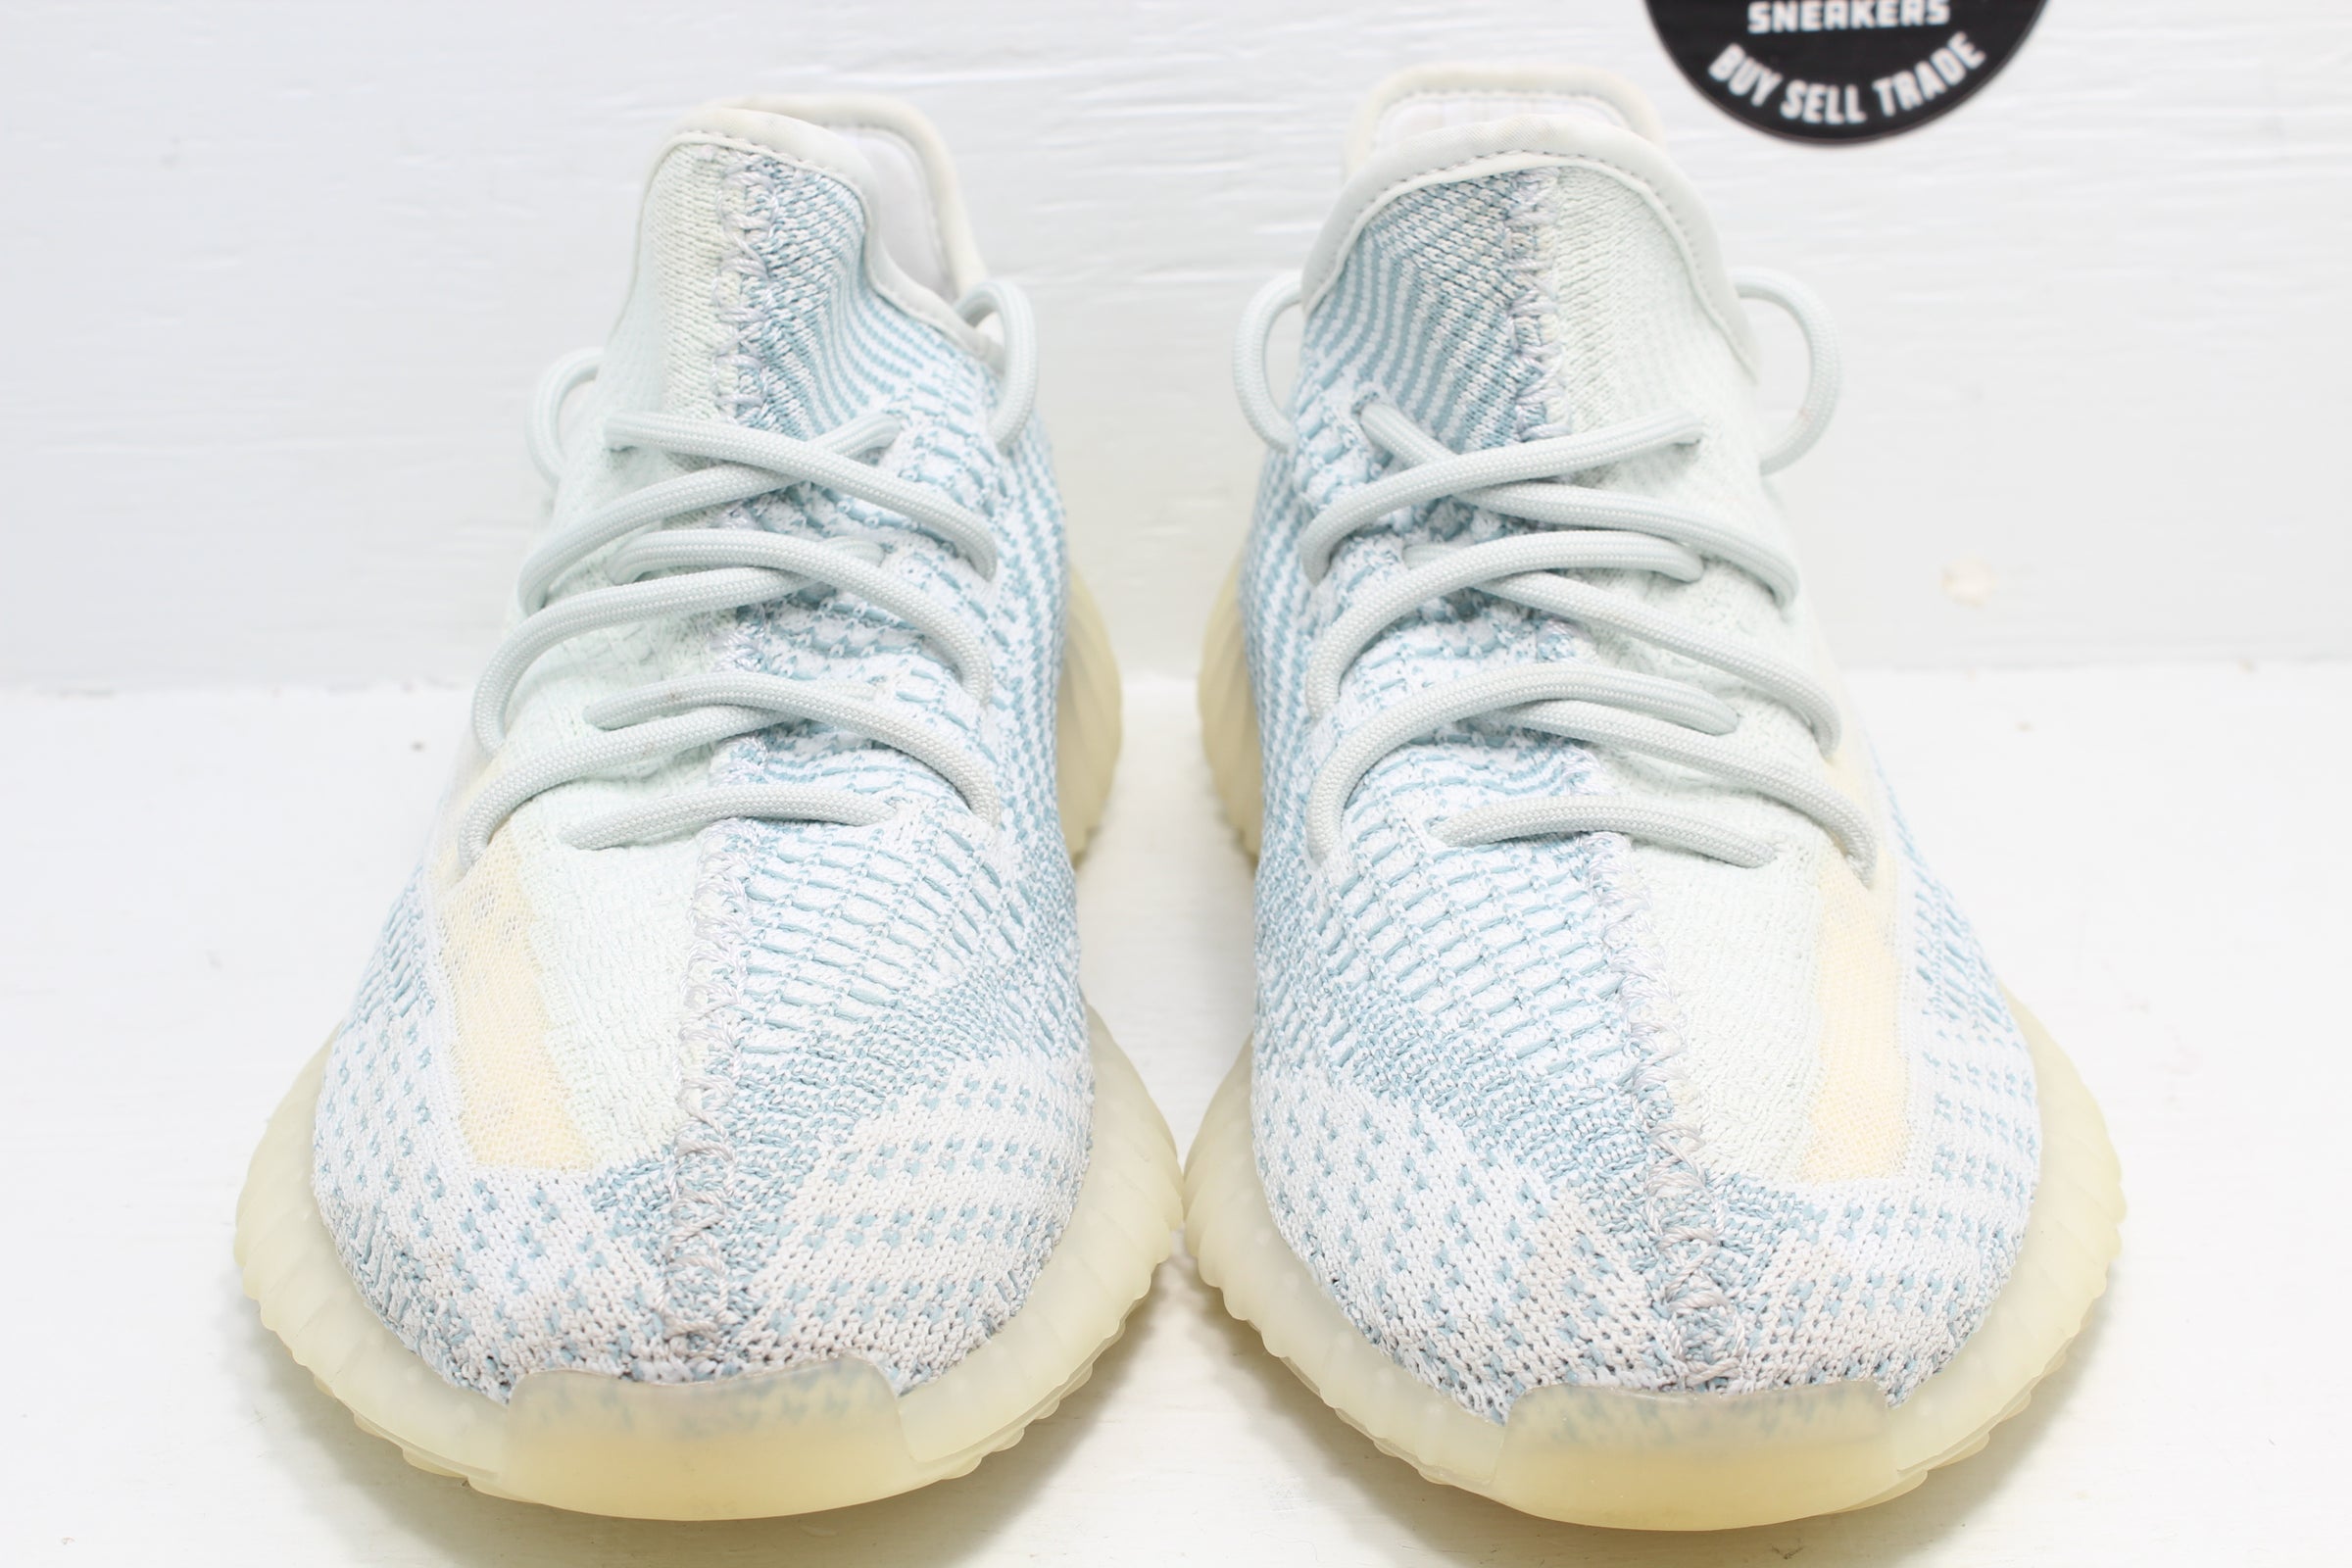 Adidas Yeezy Boost V2 Cloud White (Non-Reflective) | Hype Stew Sneakers Detroit